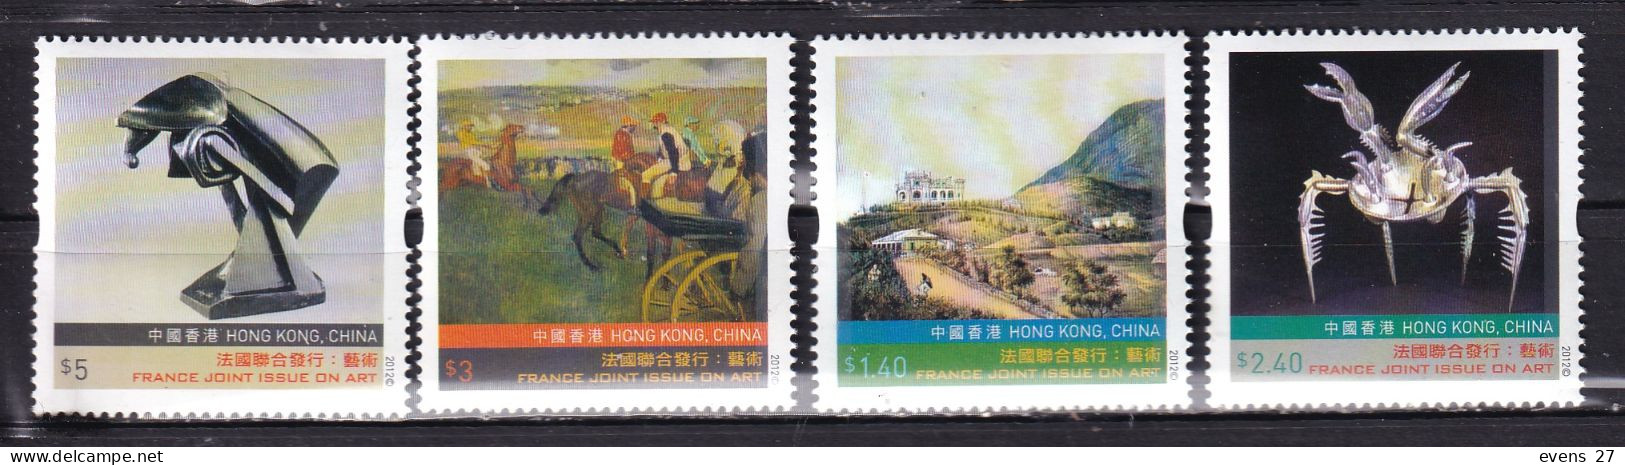 HONG KONG-2012-JOINT ISSUE WITH FRANCE-MNH. - Nuovi